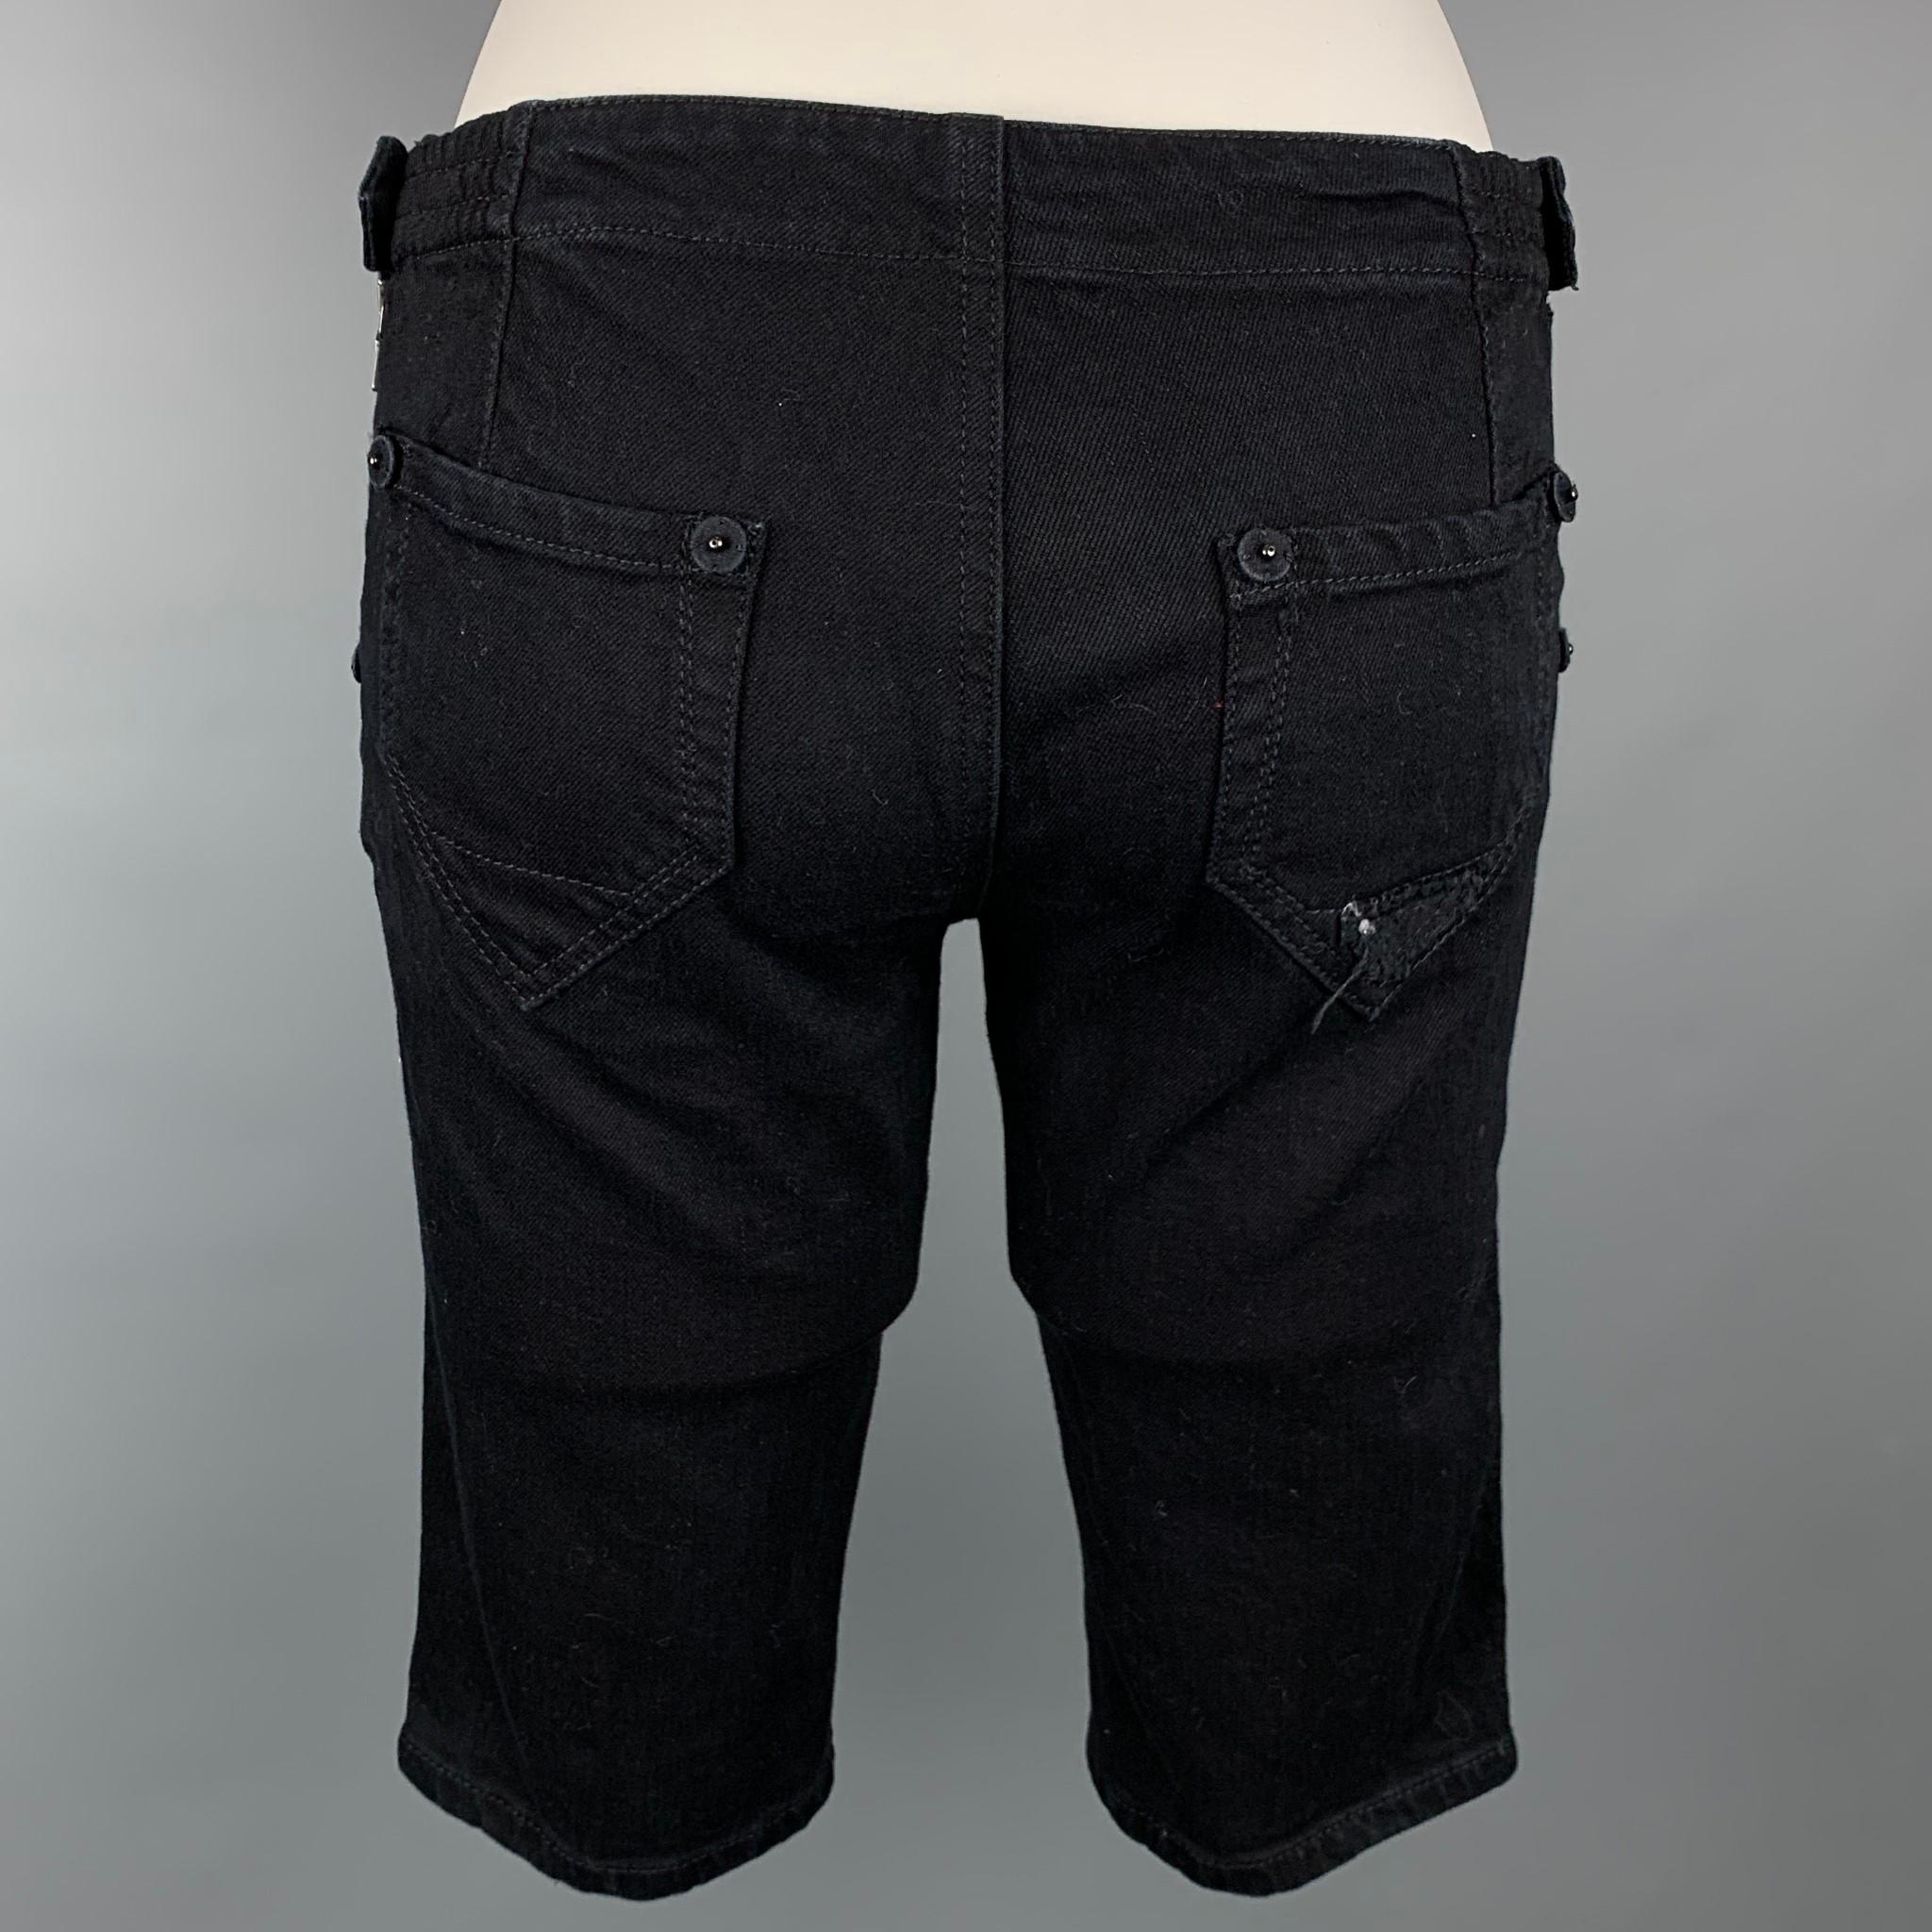 PRADA shorts comes in a black denim featuring front & back pockets and a side button and zipper closure. Made in Italy.

Very Good Pre-Owned Condition.
Marked: 26

Measurements:

Waist: 28 in.
Rise: 8 in.
Inseam: 12.5 in. 